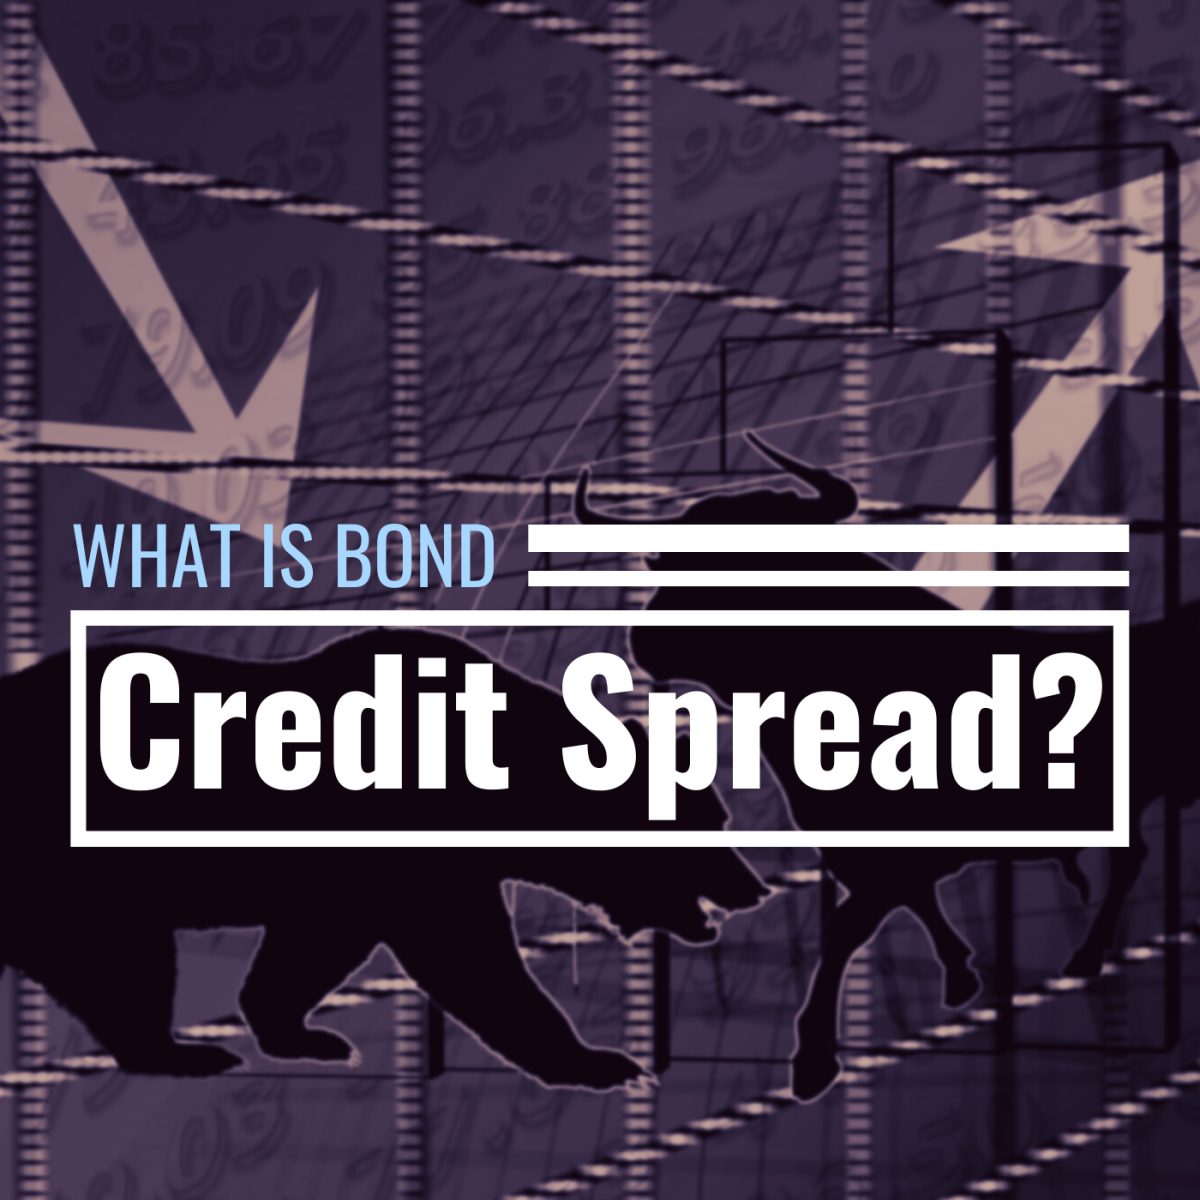 Credit spread is a handy way to compare the yields of two bonds with the same maturity. 